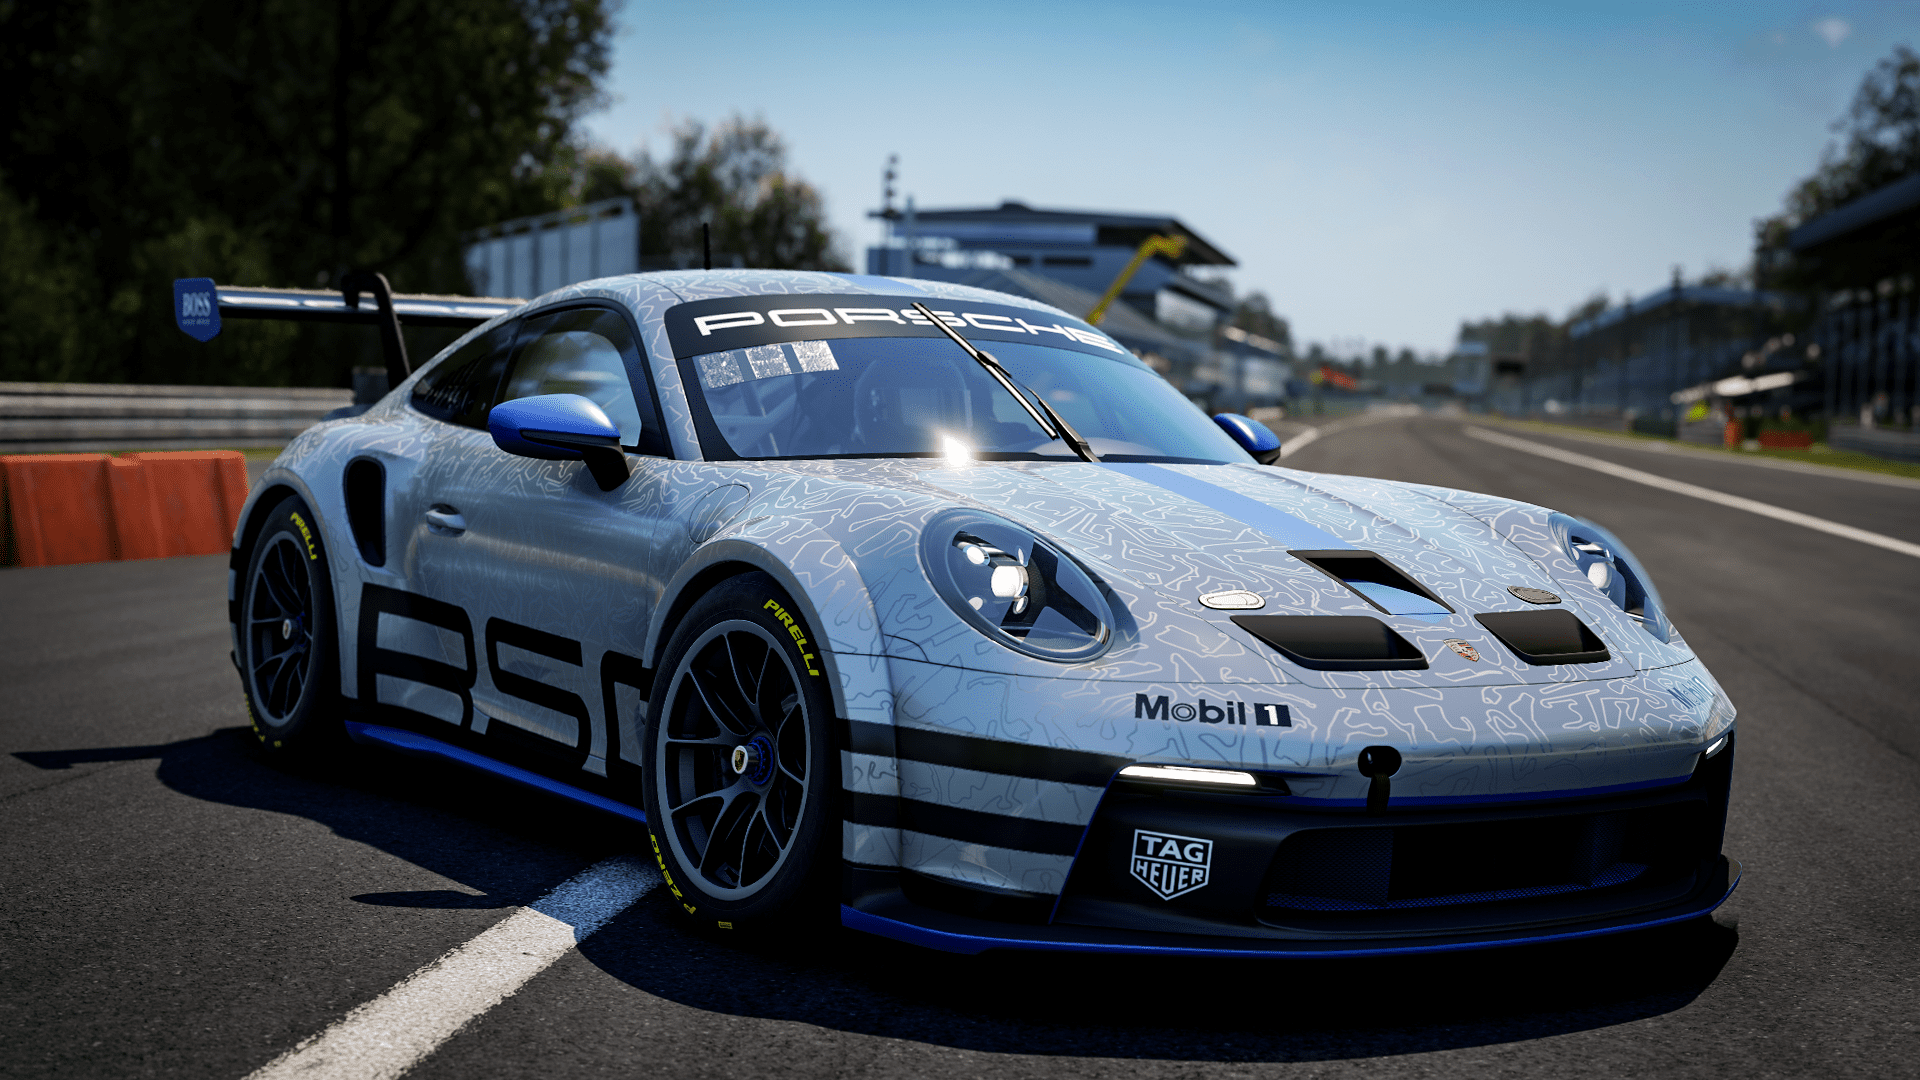 Be on the 2023 Porsche Carrera Cup Italia grid with ‘Drive to Dream’ esports contest